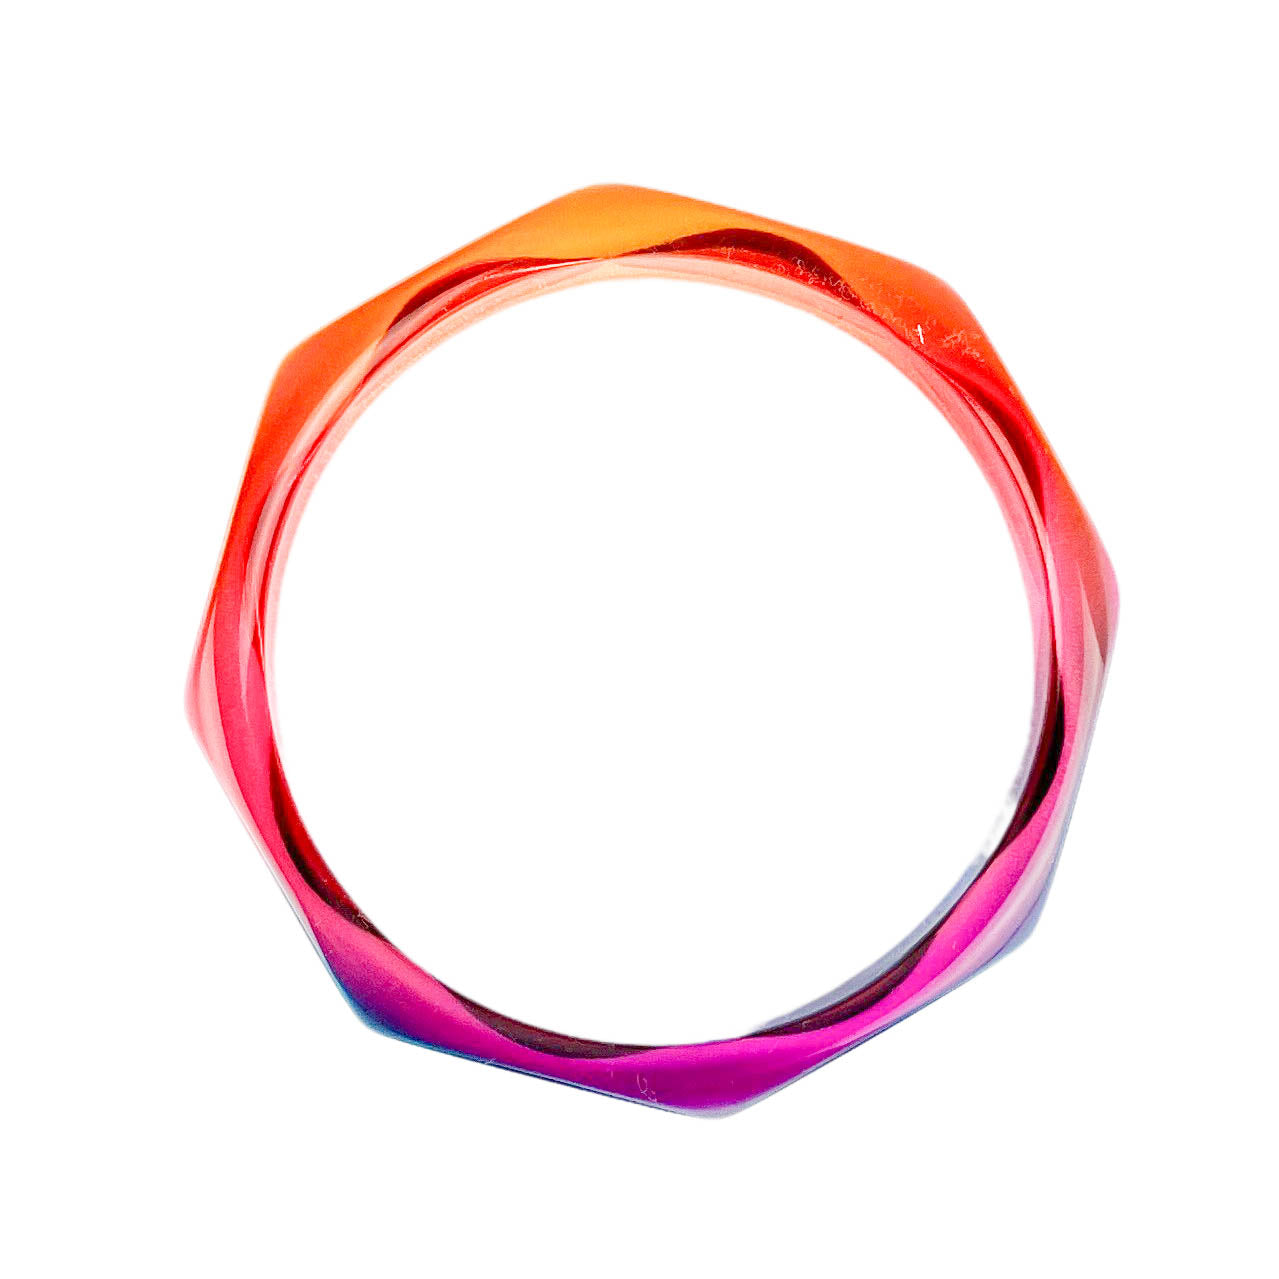 Isabel Marant Nhiote Multicolored Bracelet in Fuchsia - Discounts on Isabel Marant at UAL